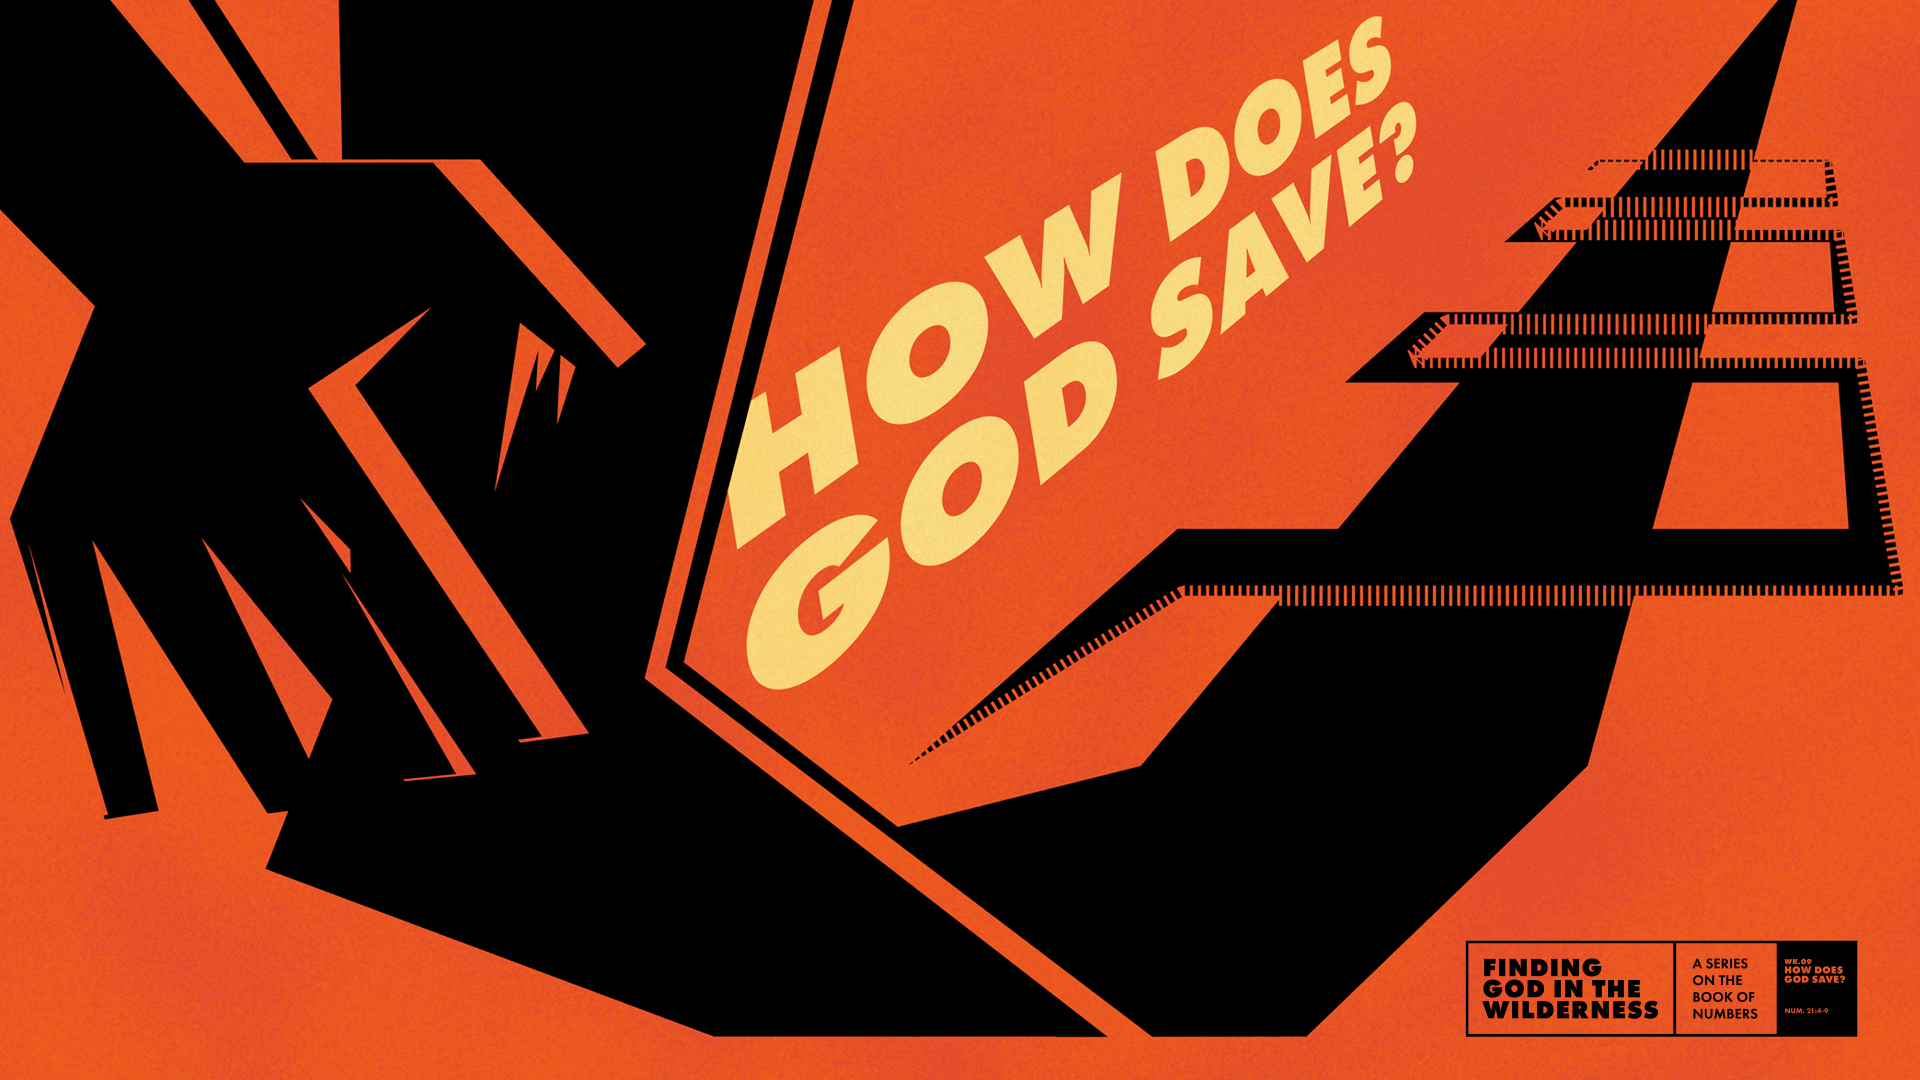 How Does God Save?